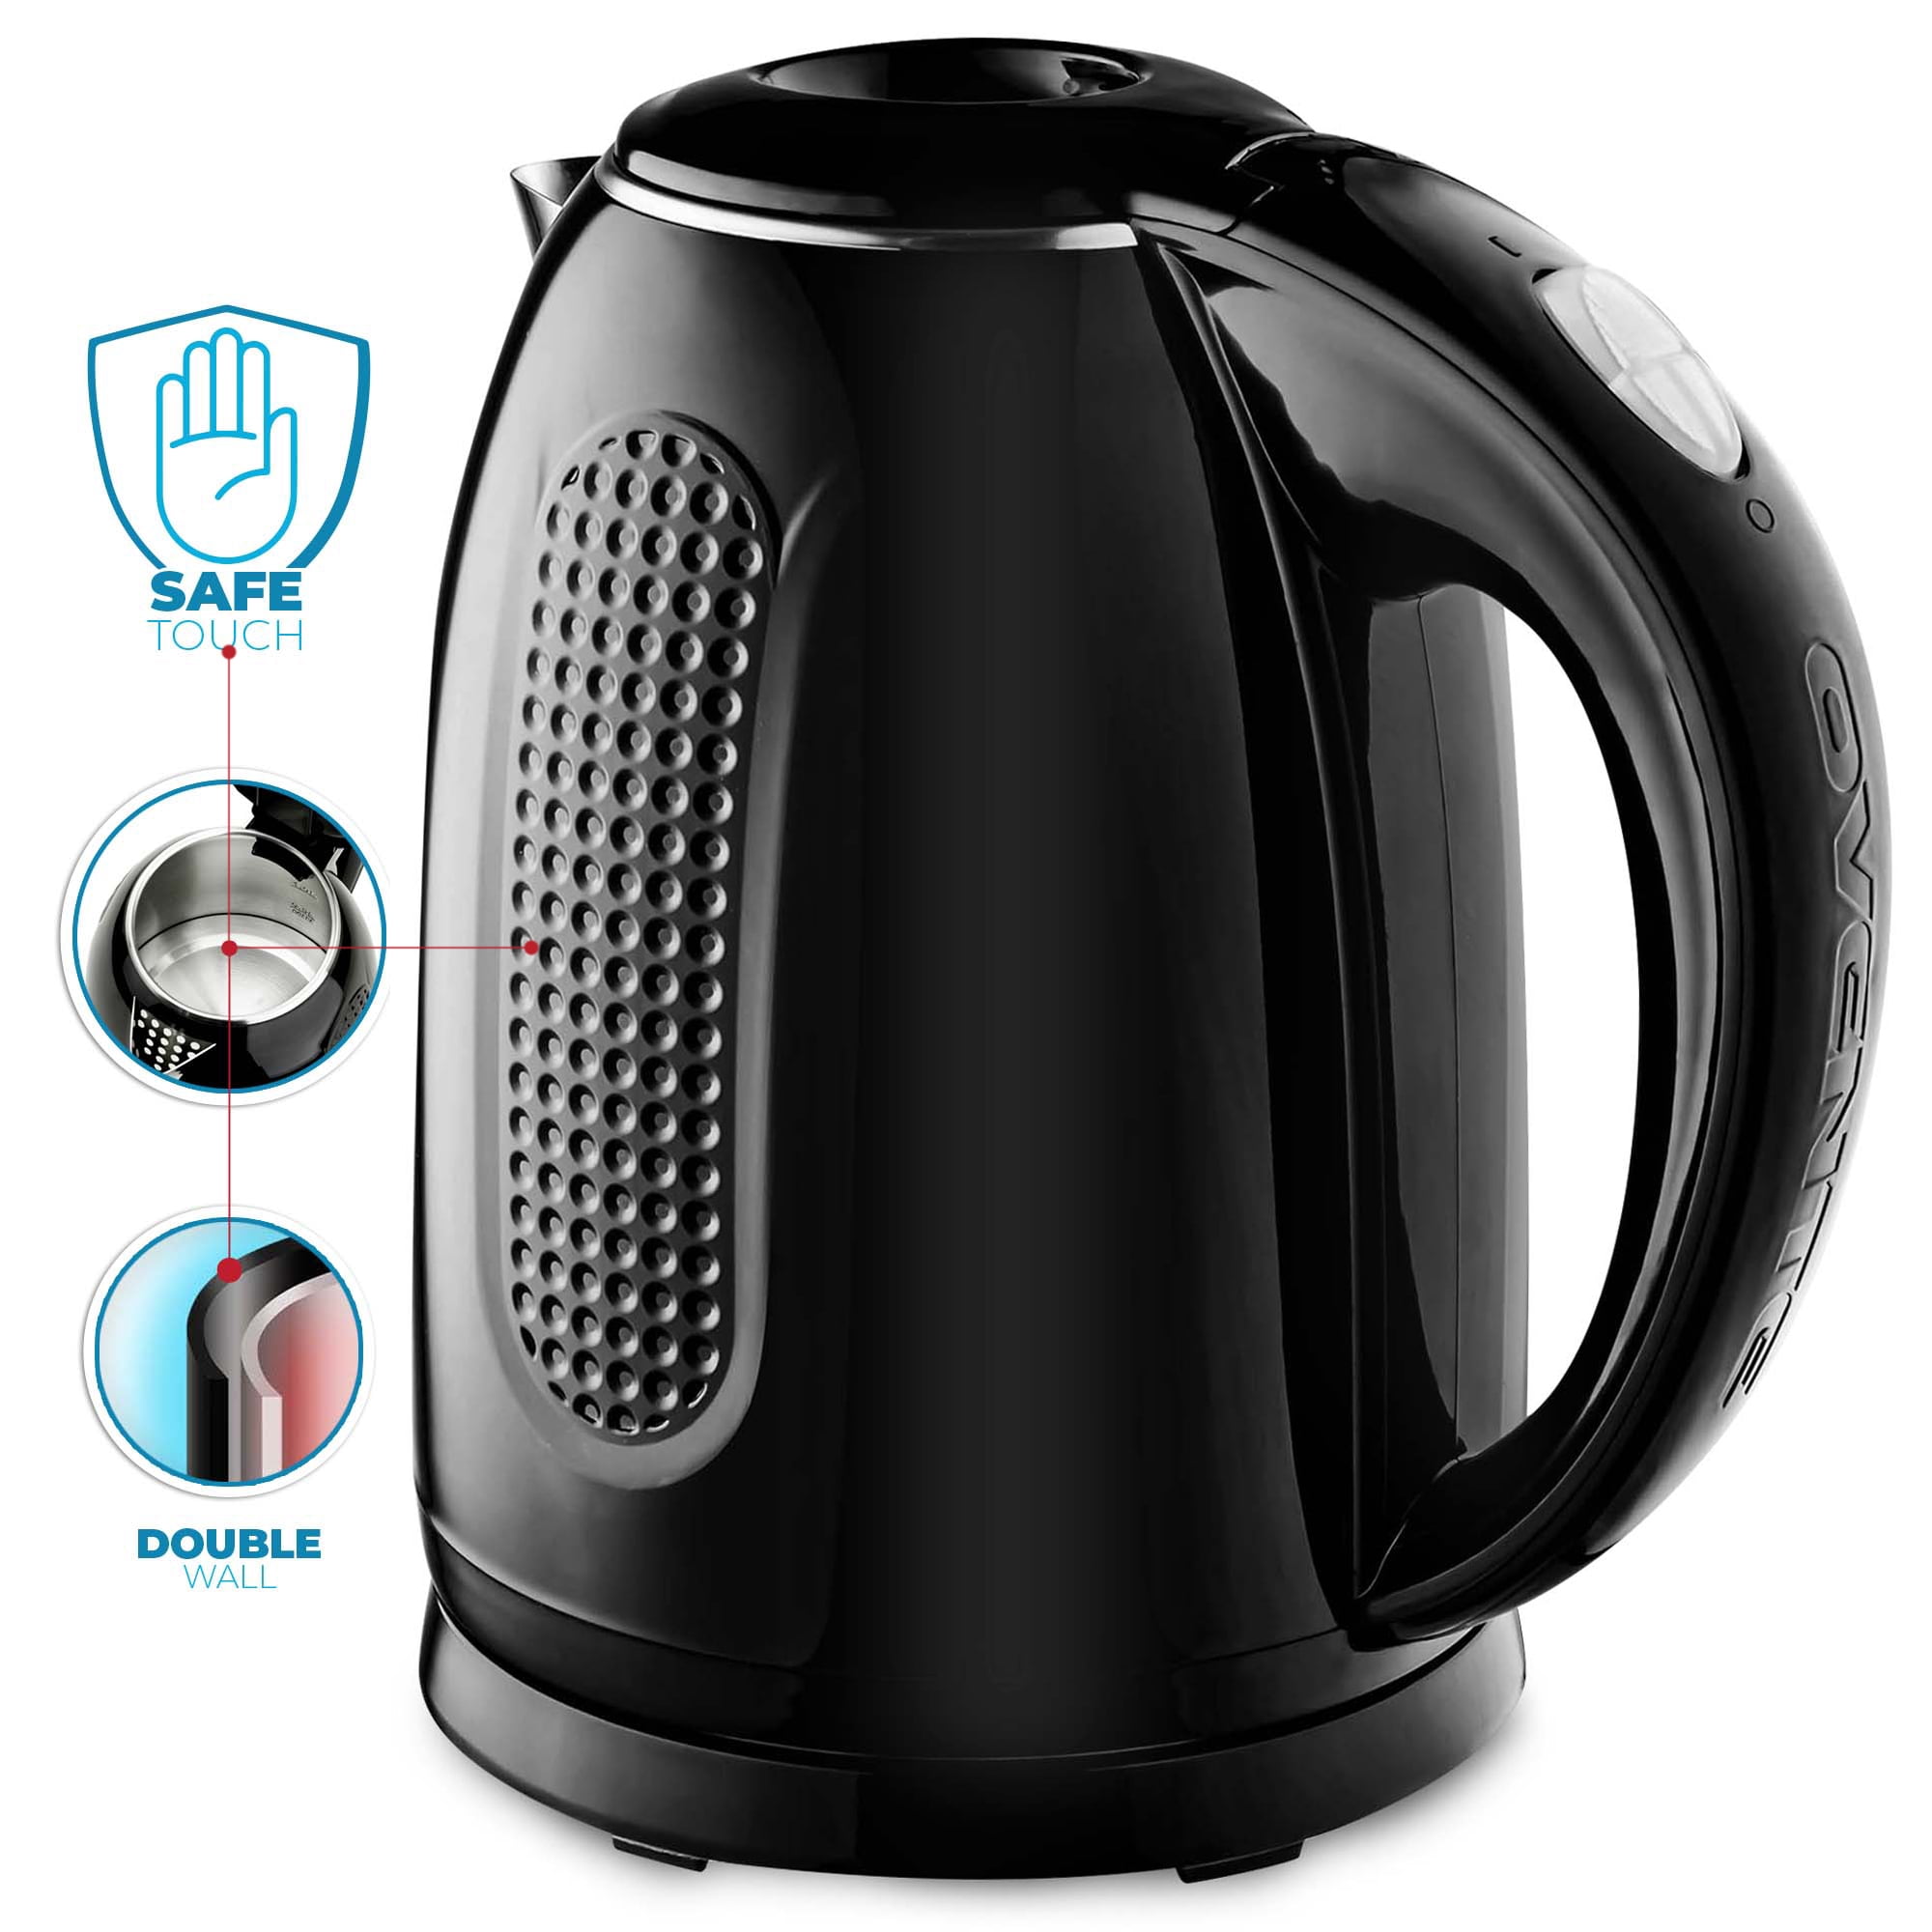 304 Stainless Steel 2 Year Warranty 1500W Fast Water Boiled & Tea Heater Aicok Electric Kettle Auto Shut Off and Boil Dry Protection BPA Free with Tea Filter 